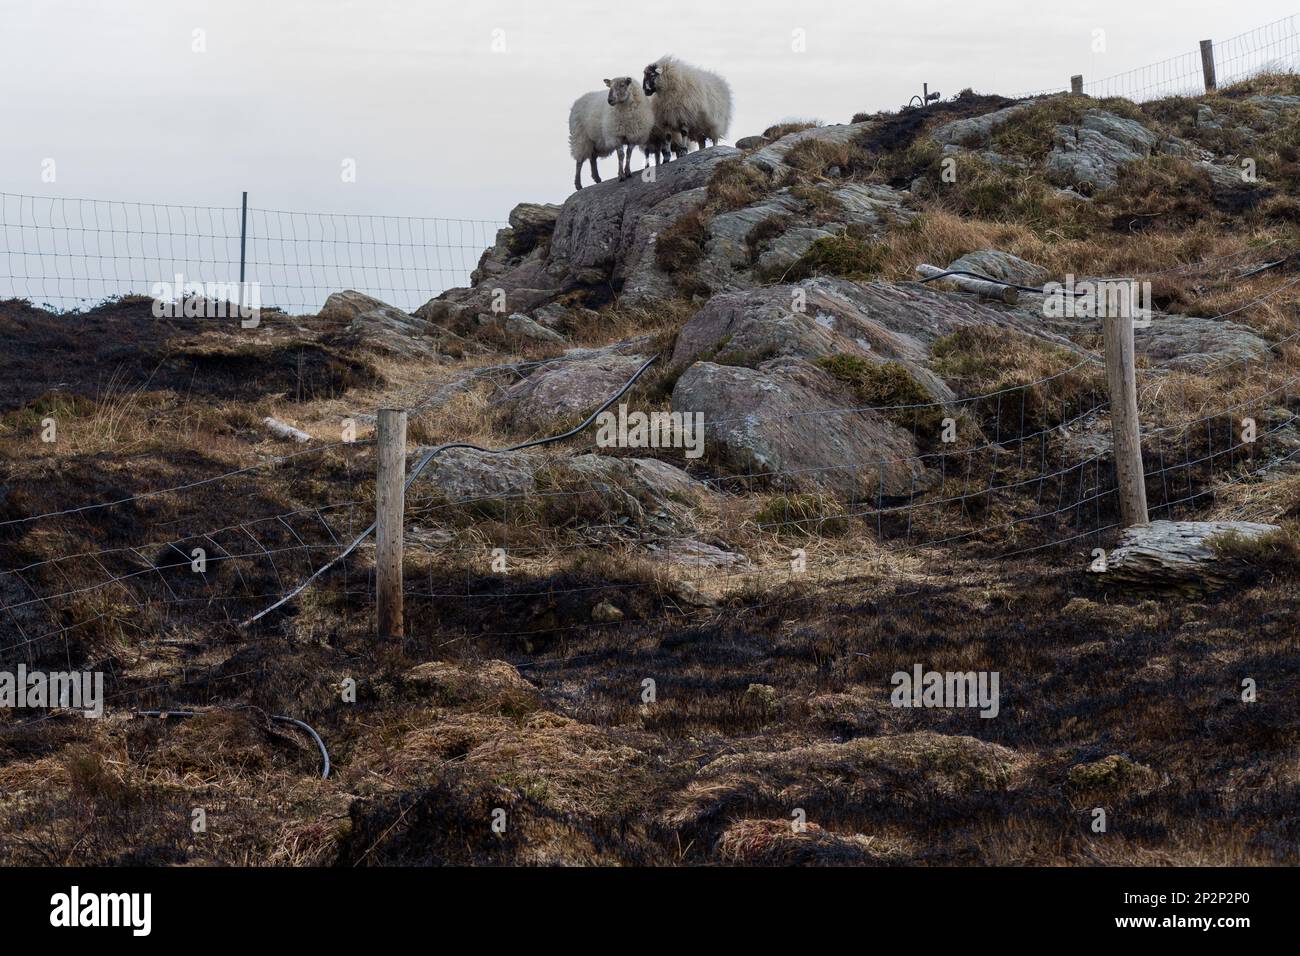 Sheep surrounded by scorched earth on Mount Gabriel after fire burnt vegetation. Stock Photo